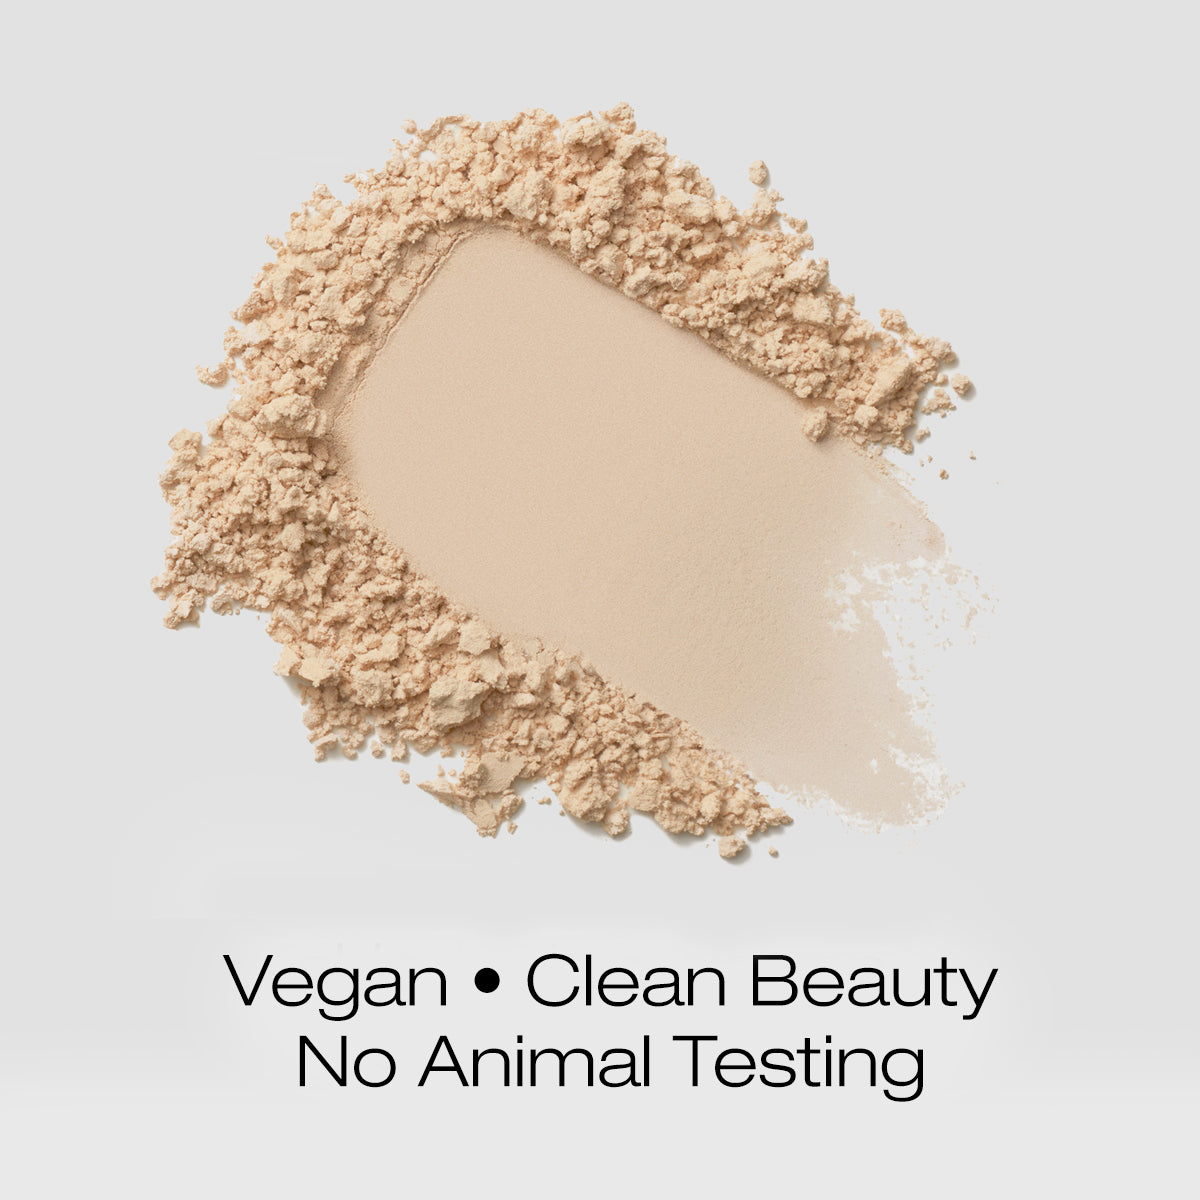 a swatch of light colored foundation powder indicating that the formula is vegan, clean beauty and is not tested on animals